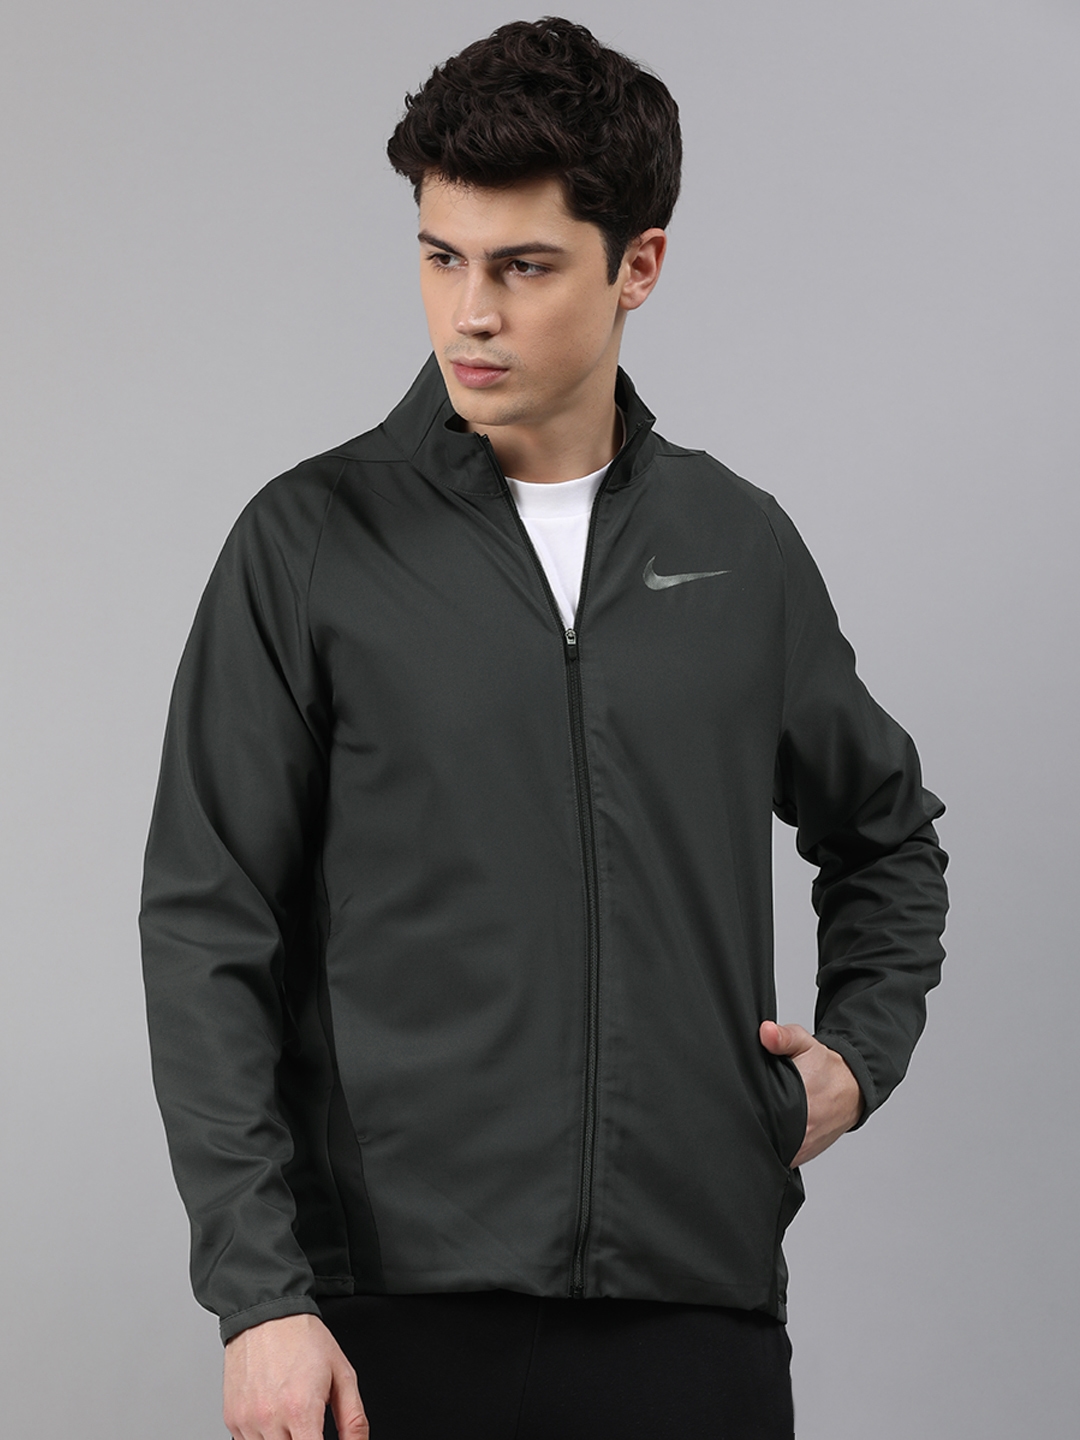 Full Sleeve Casual Jackets Dry Fit Jackets